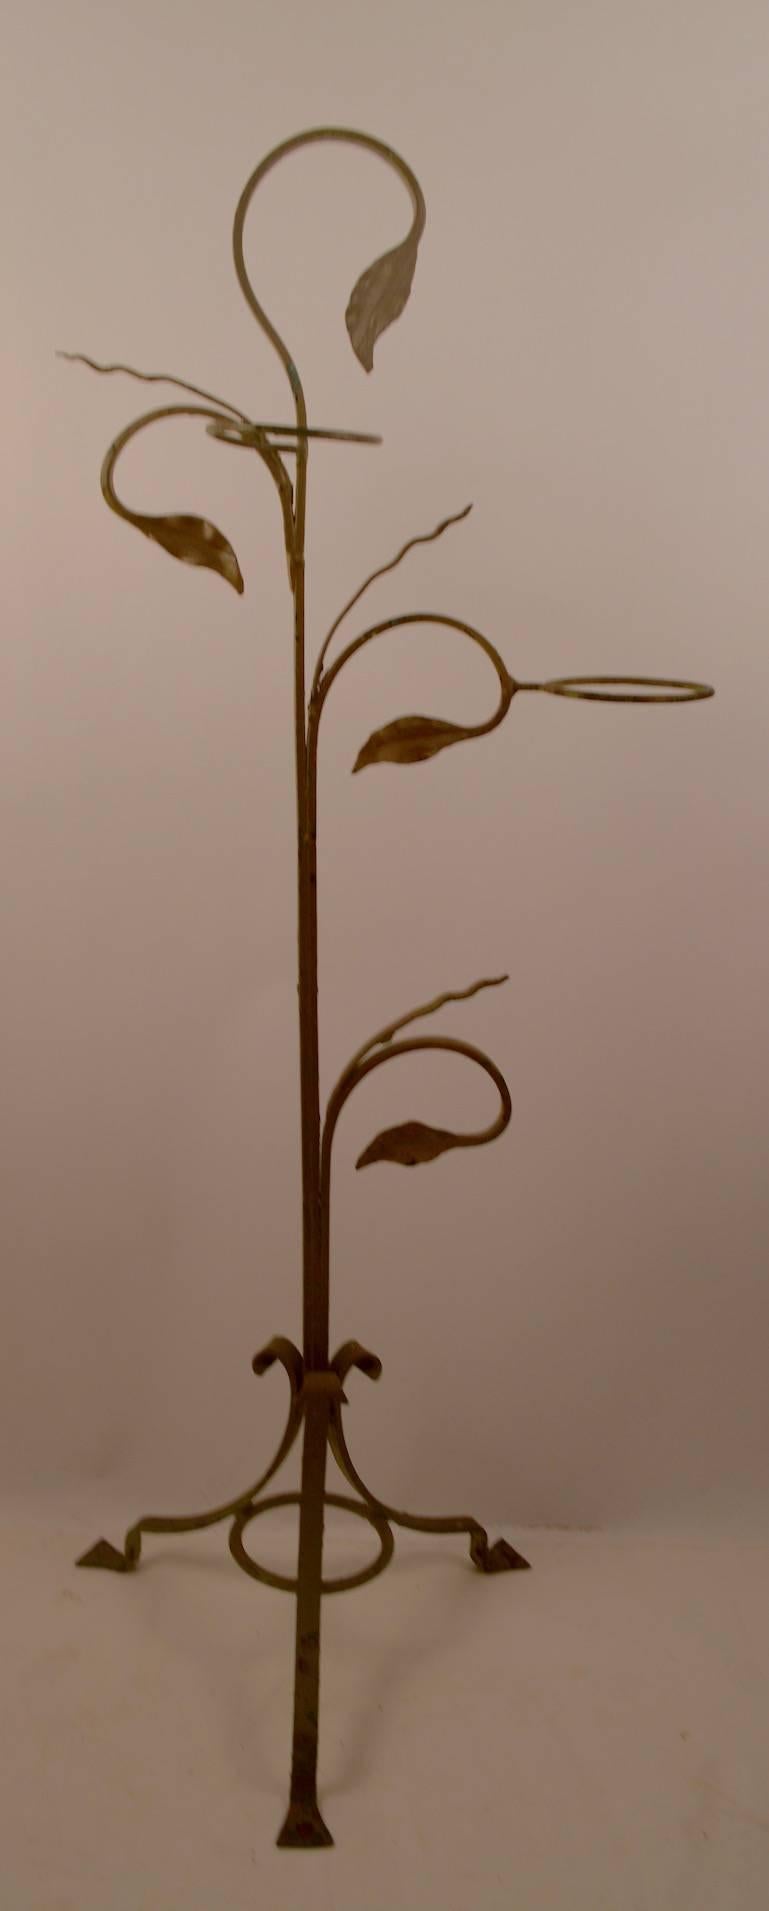 Wrought iron freestanding plant stand by Salterini. This example hold two flower pots, and is in old tan paint finish, paint shows wear, normal and consistent with age.